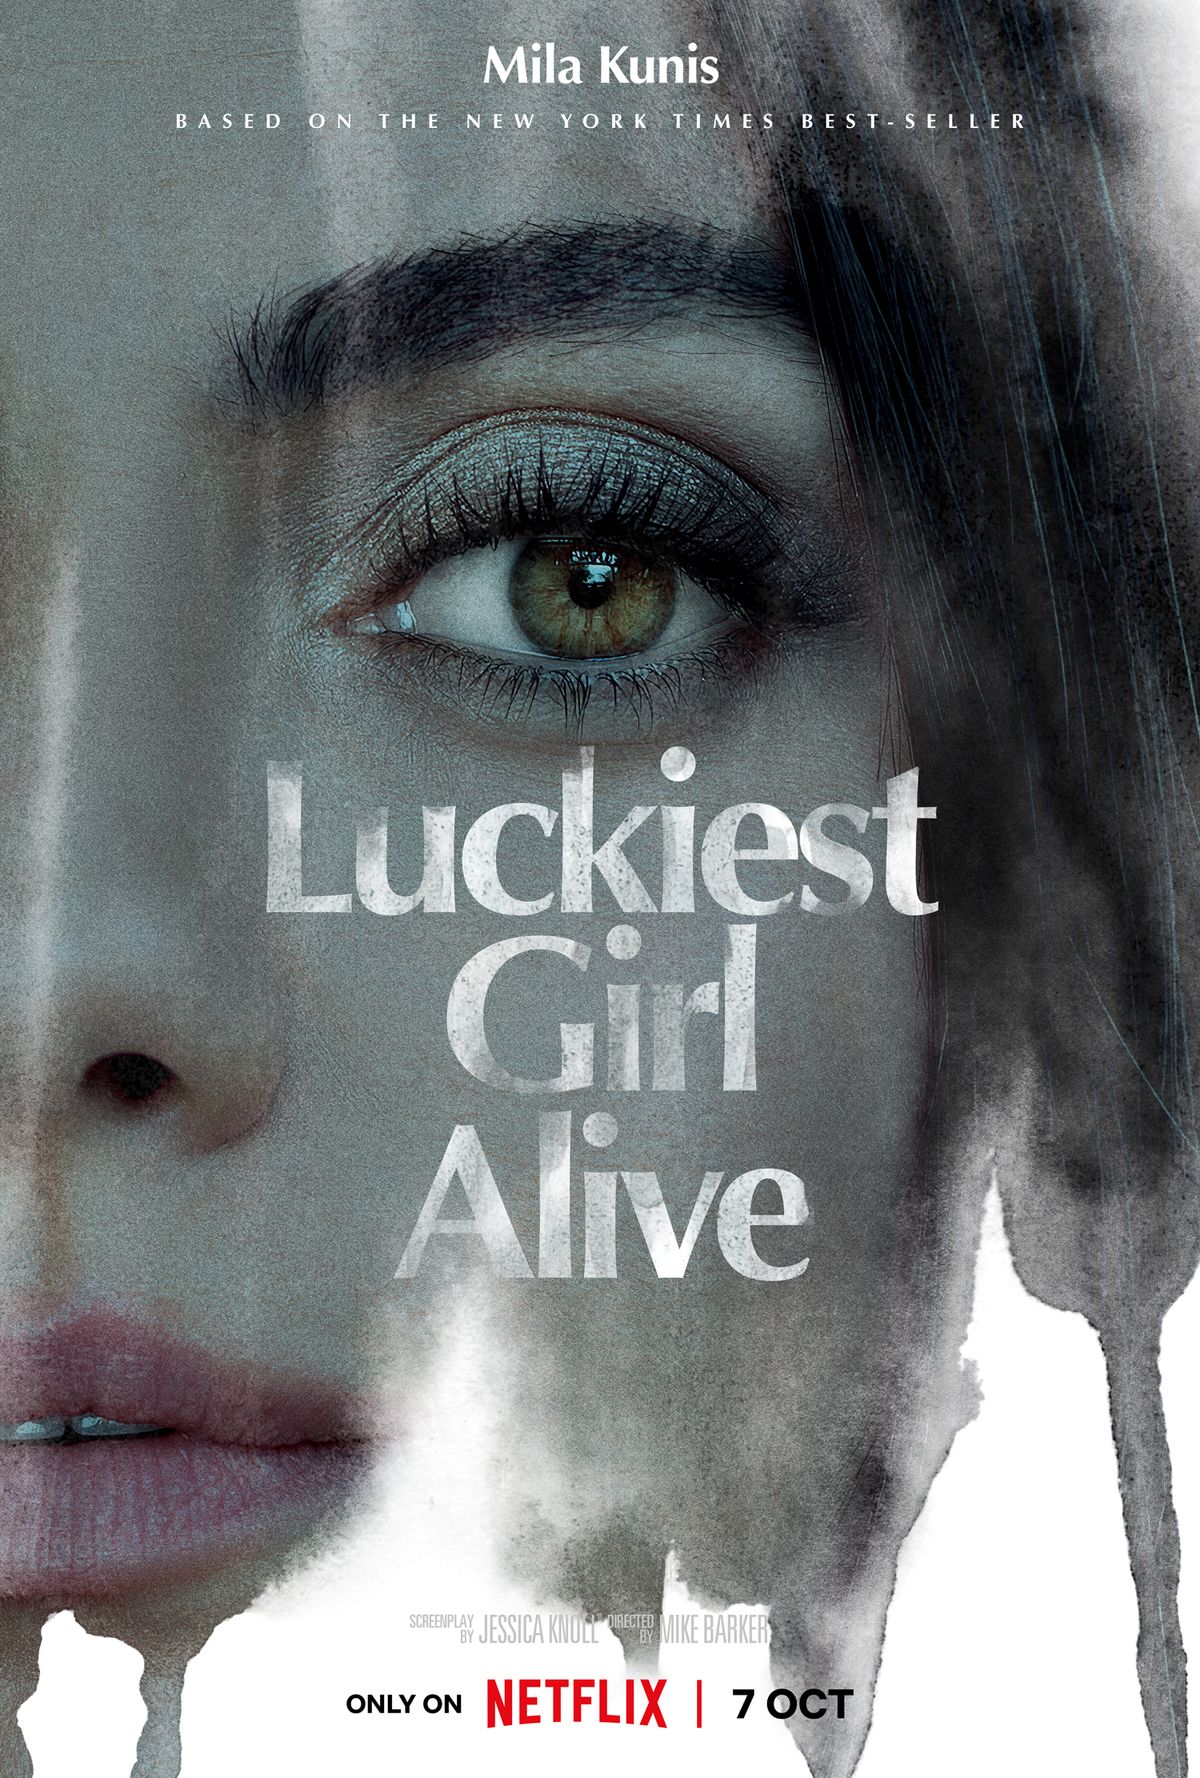 luckiest girl alive movie review rotten tomatoes